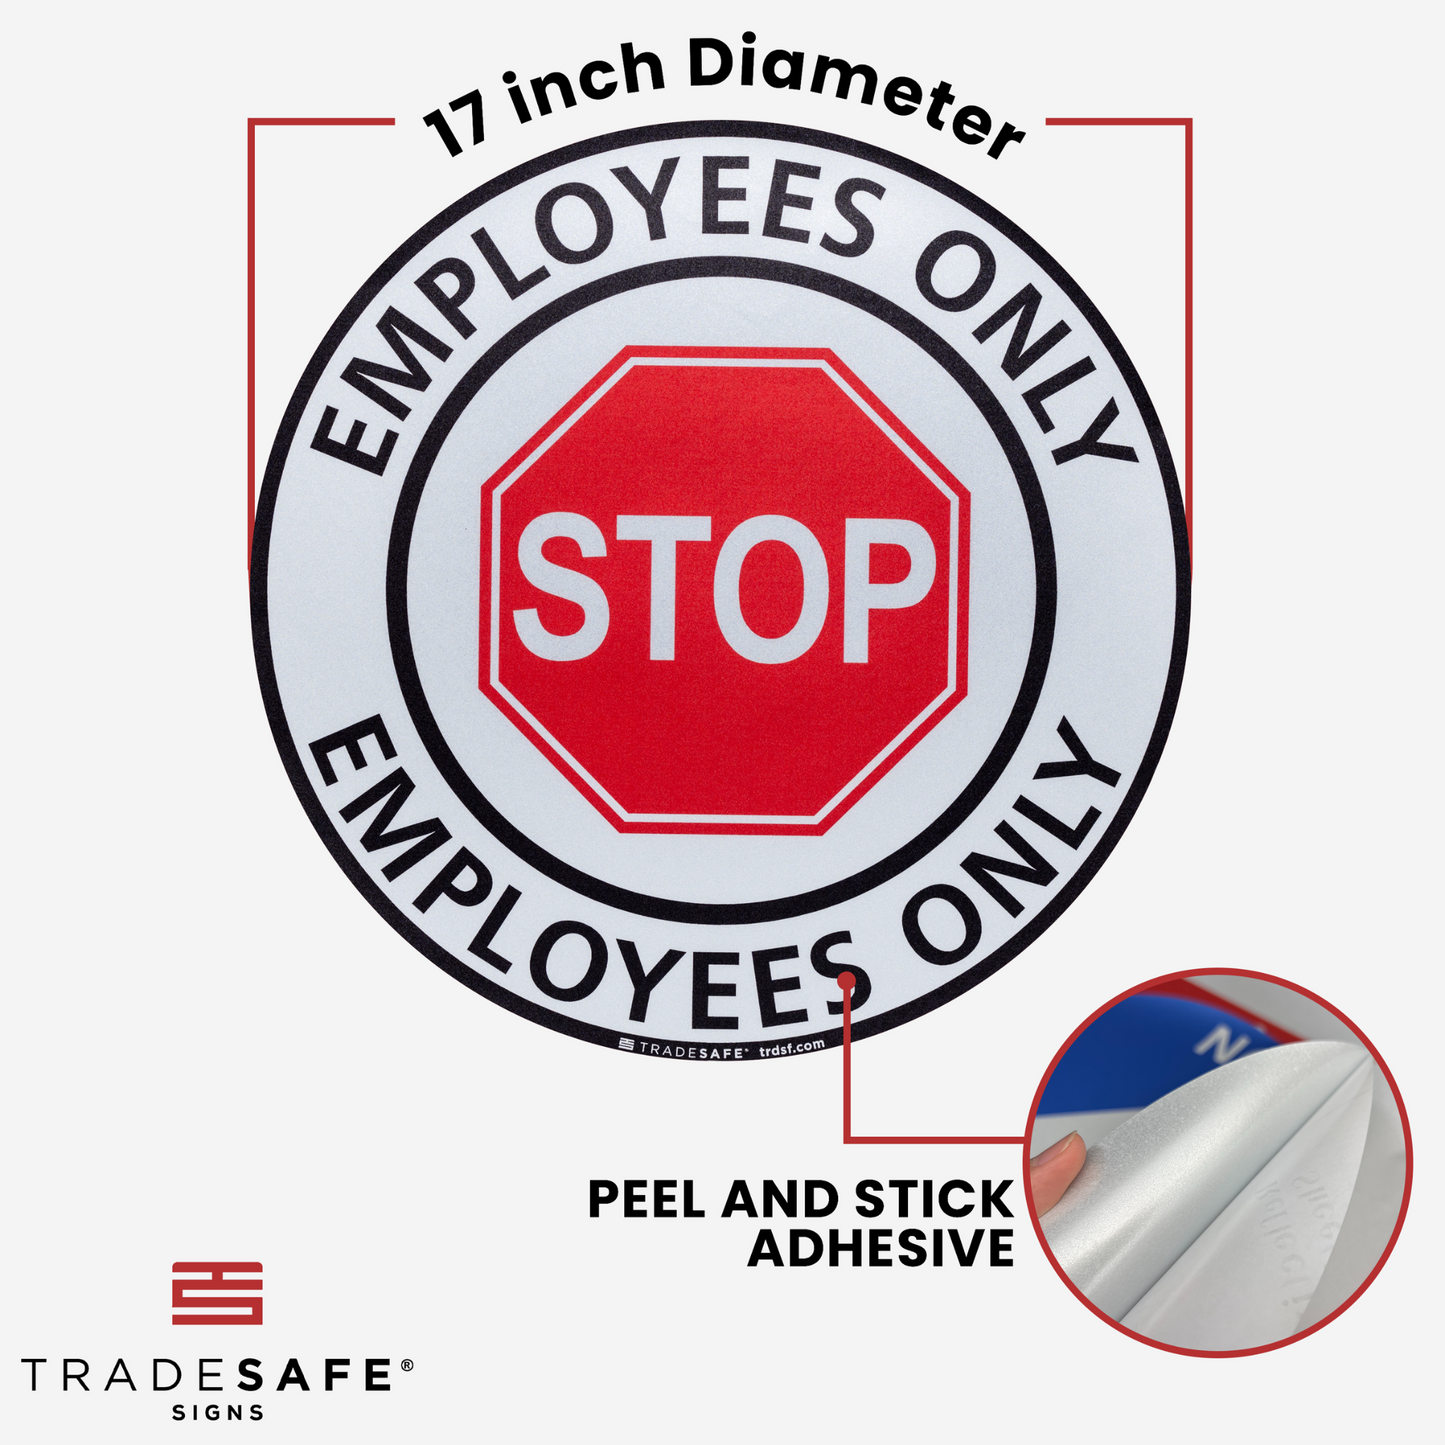 dimensions of employees only sign